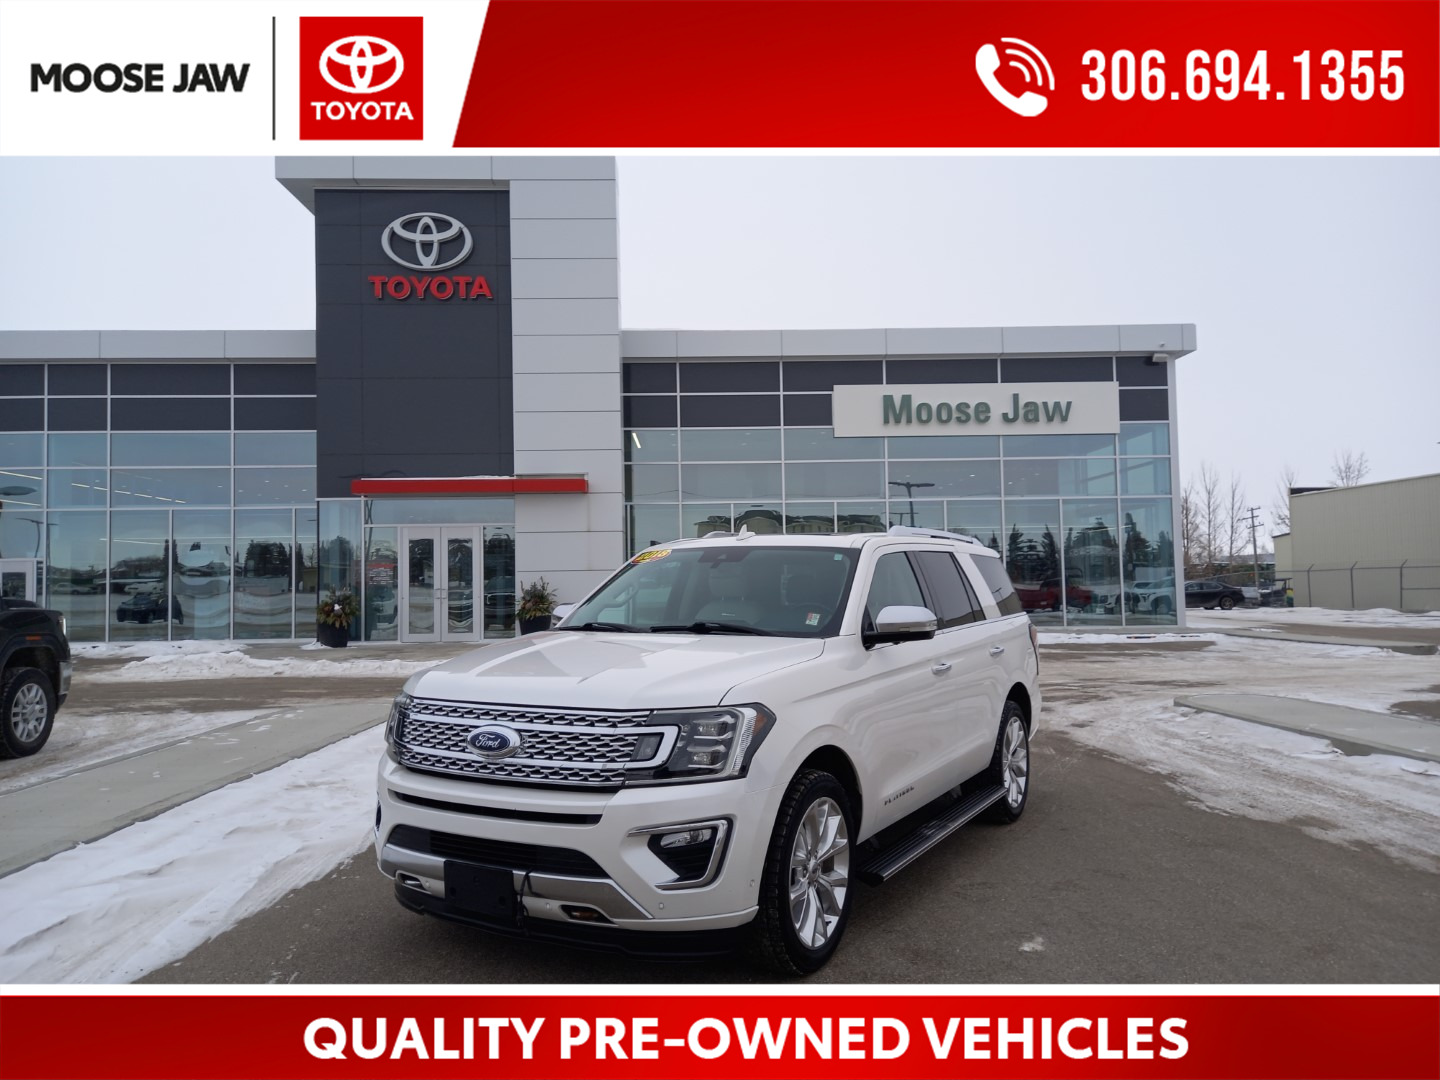 2018 Ford Expedition Platinum LOCAL TOP OF THE LINE PLATINUM PACKAGE WI